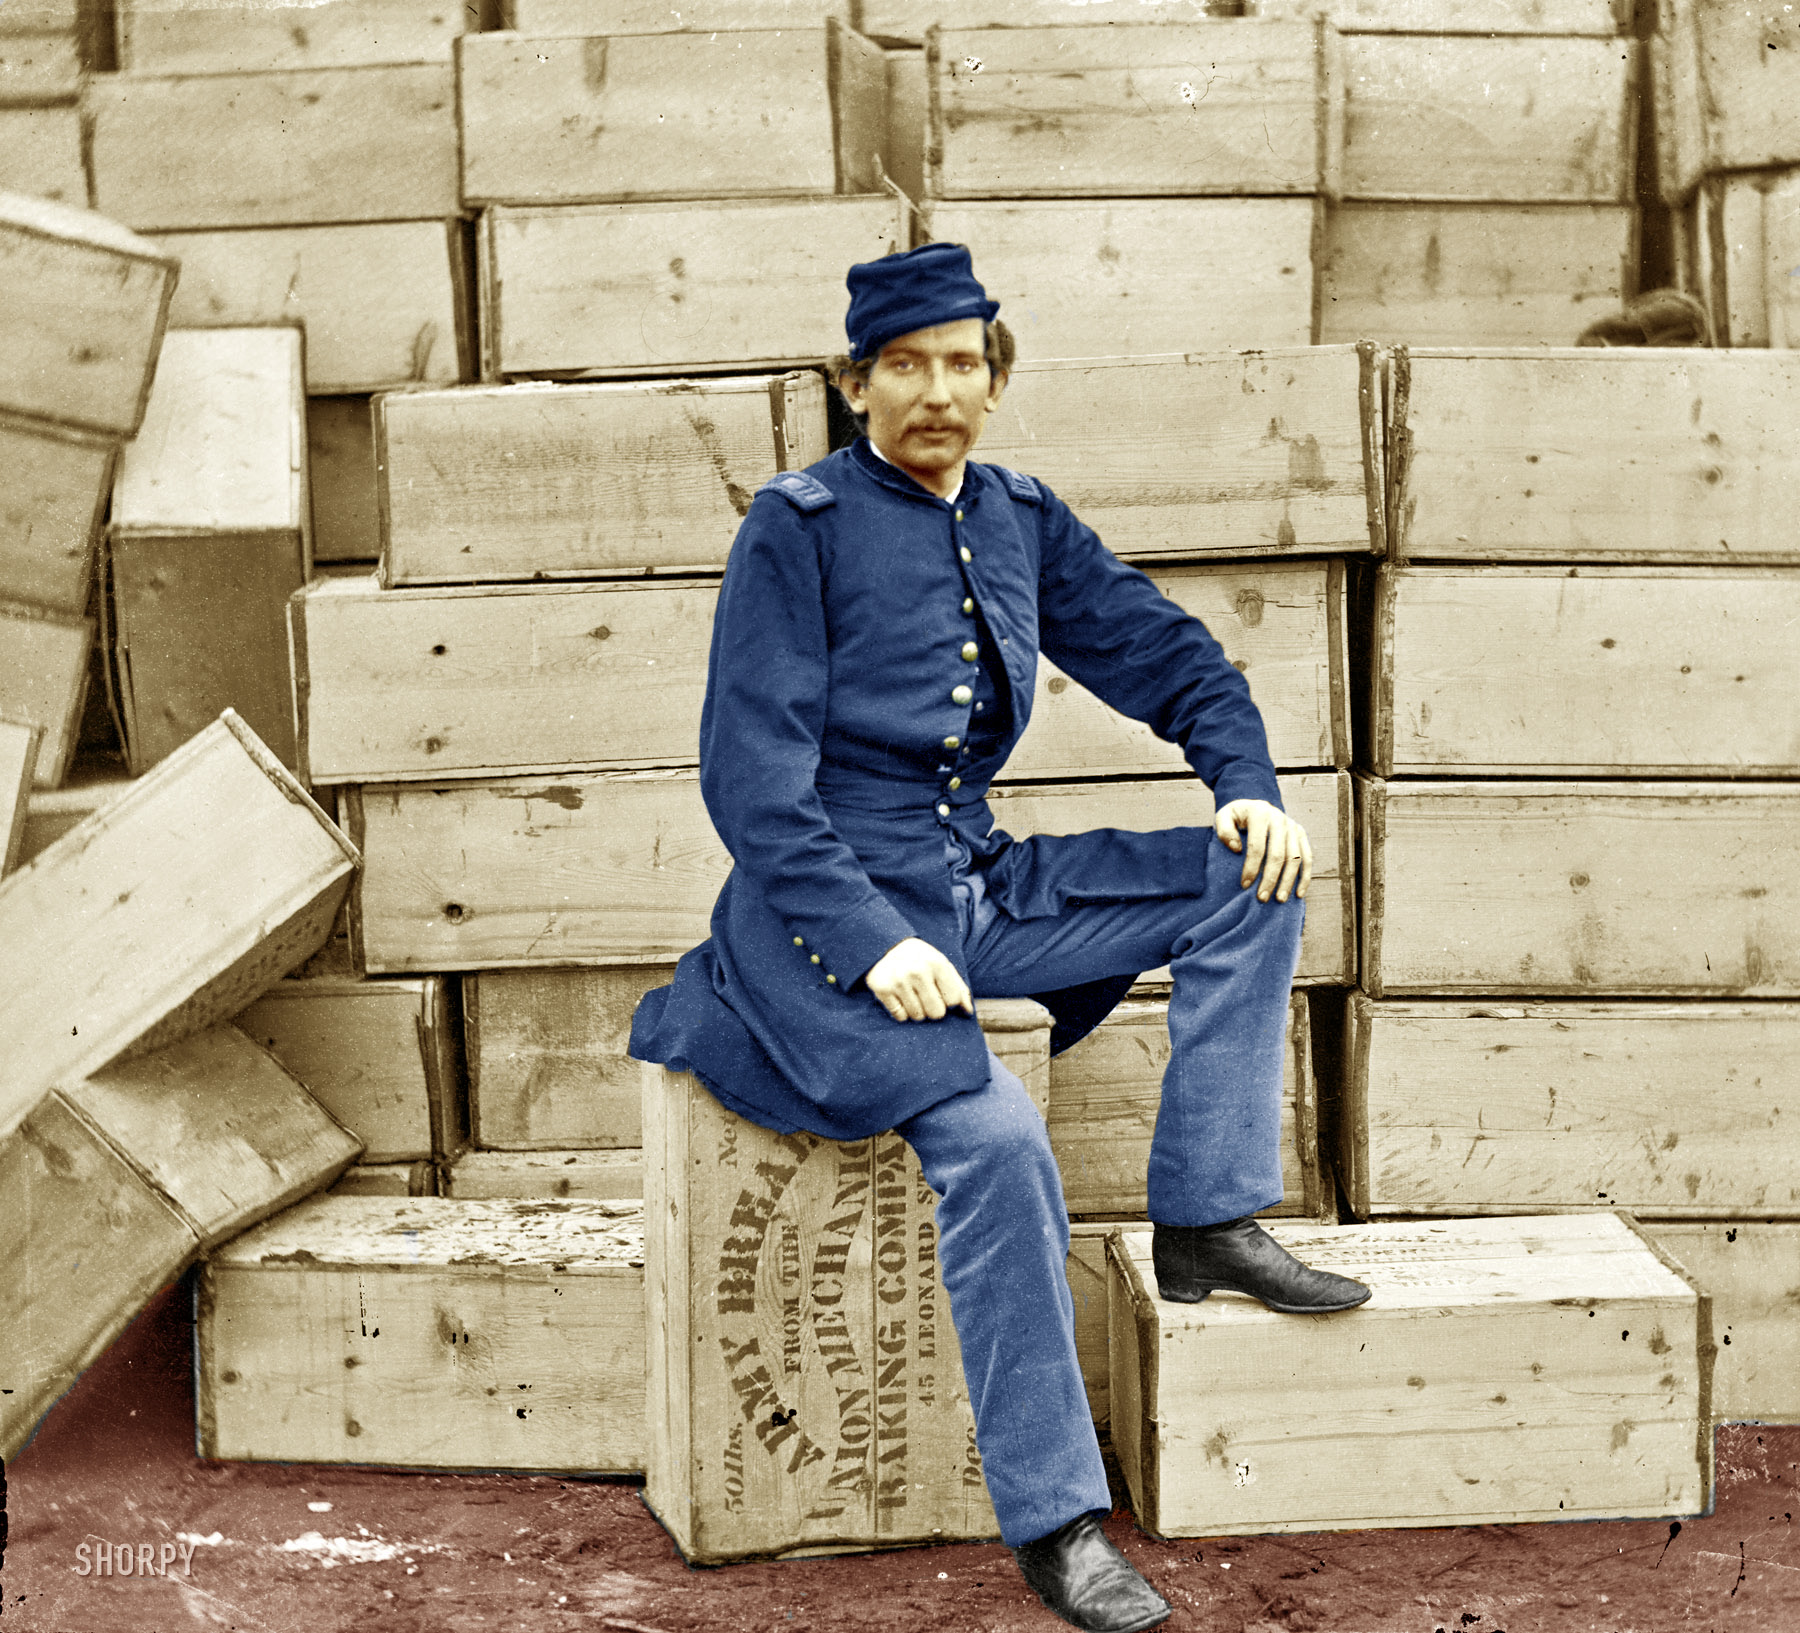 Simply a colorized version of a Shorpy photo, titled "Army Bread: 1863," from this website. It is my first attempt at colorization, and additionally I am a new member as well. Original photo | View full size.